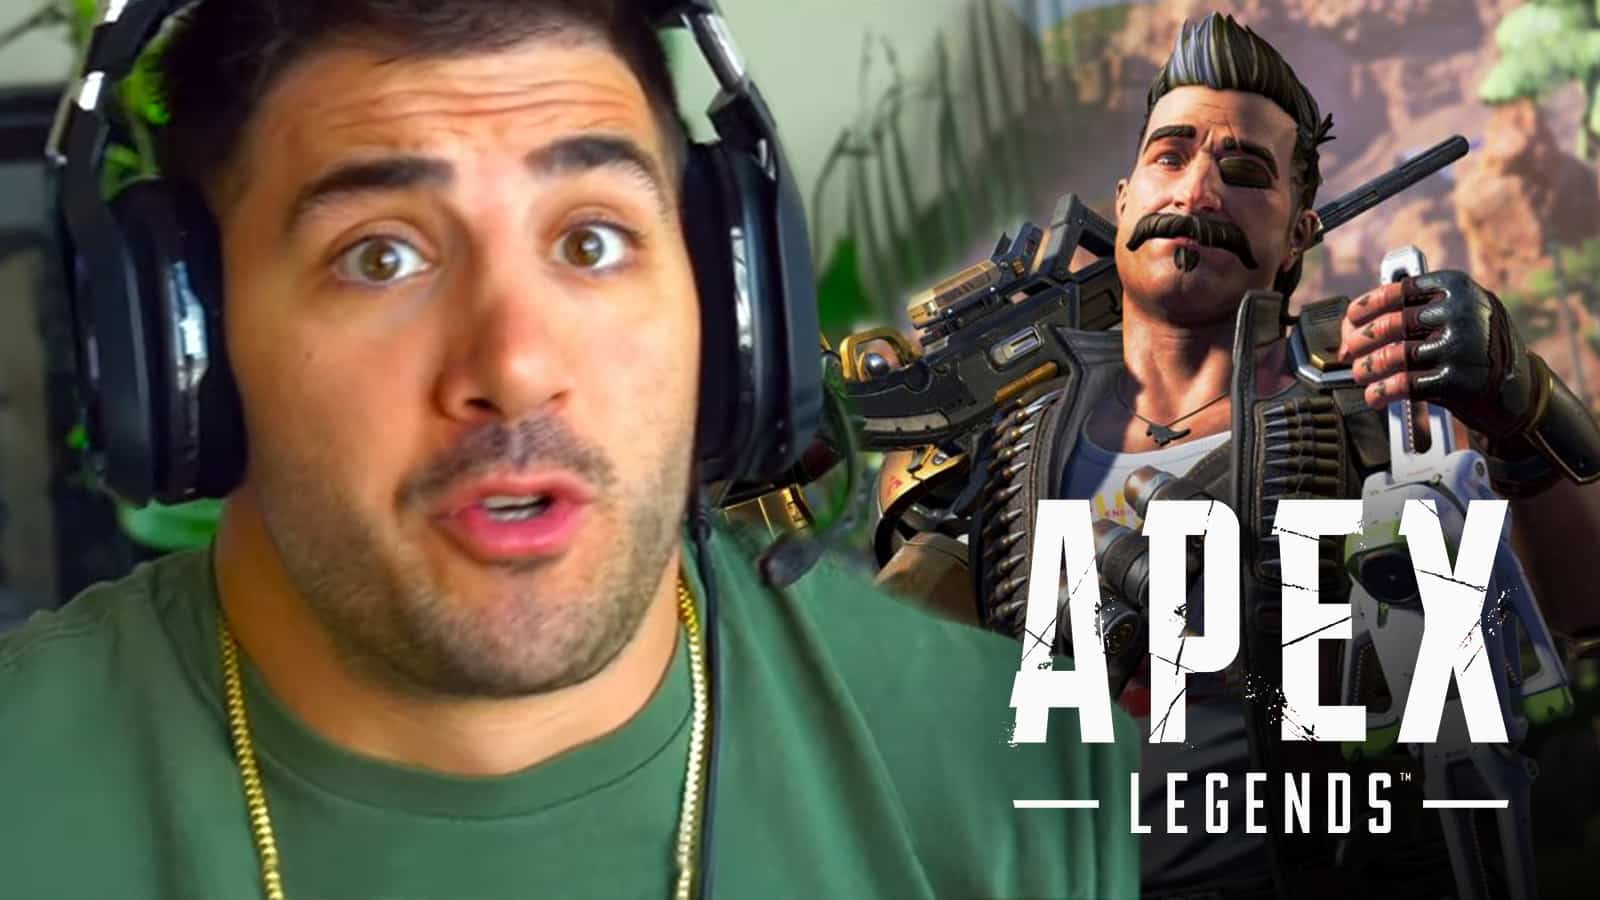 NICKMERCS has a great idea for Apex Legends ranked play, but there are some worries.